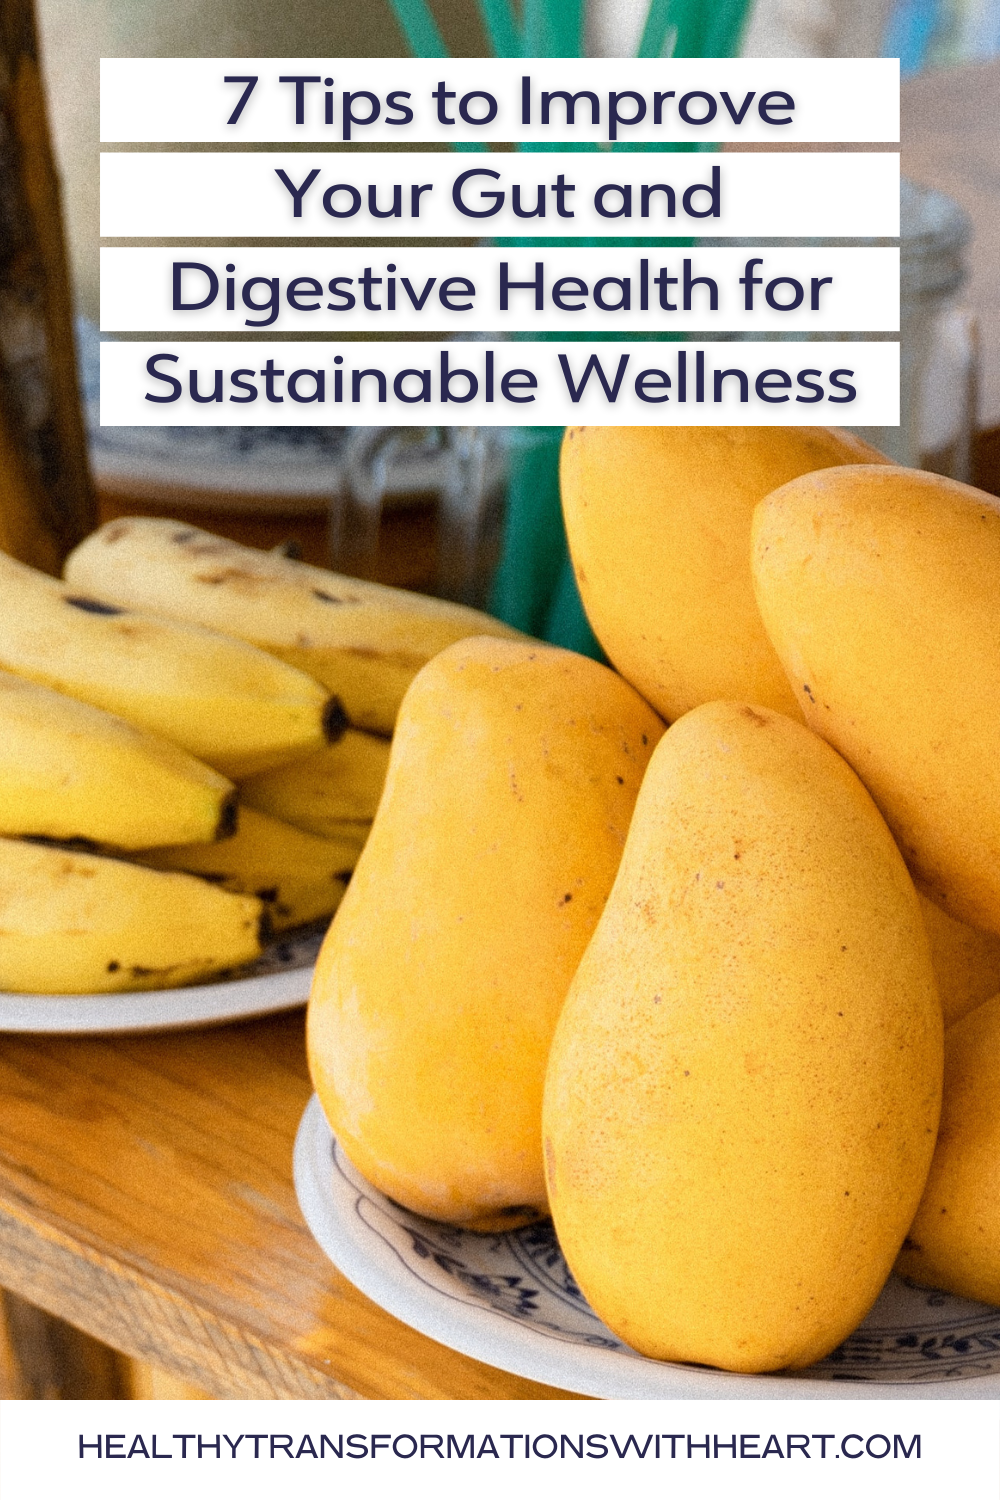 _7 Tips to Improve Your Gut and Digestive Health for Sustainable Wellness - Blog Post.png